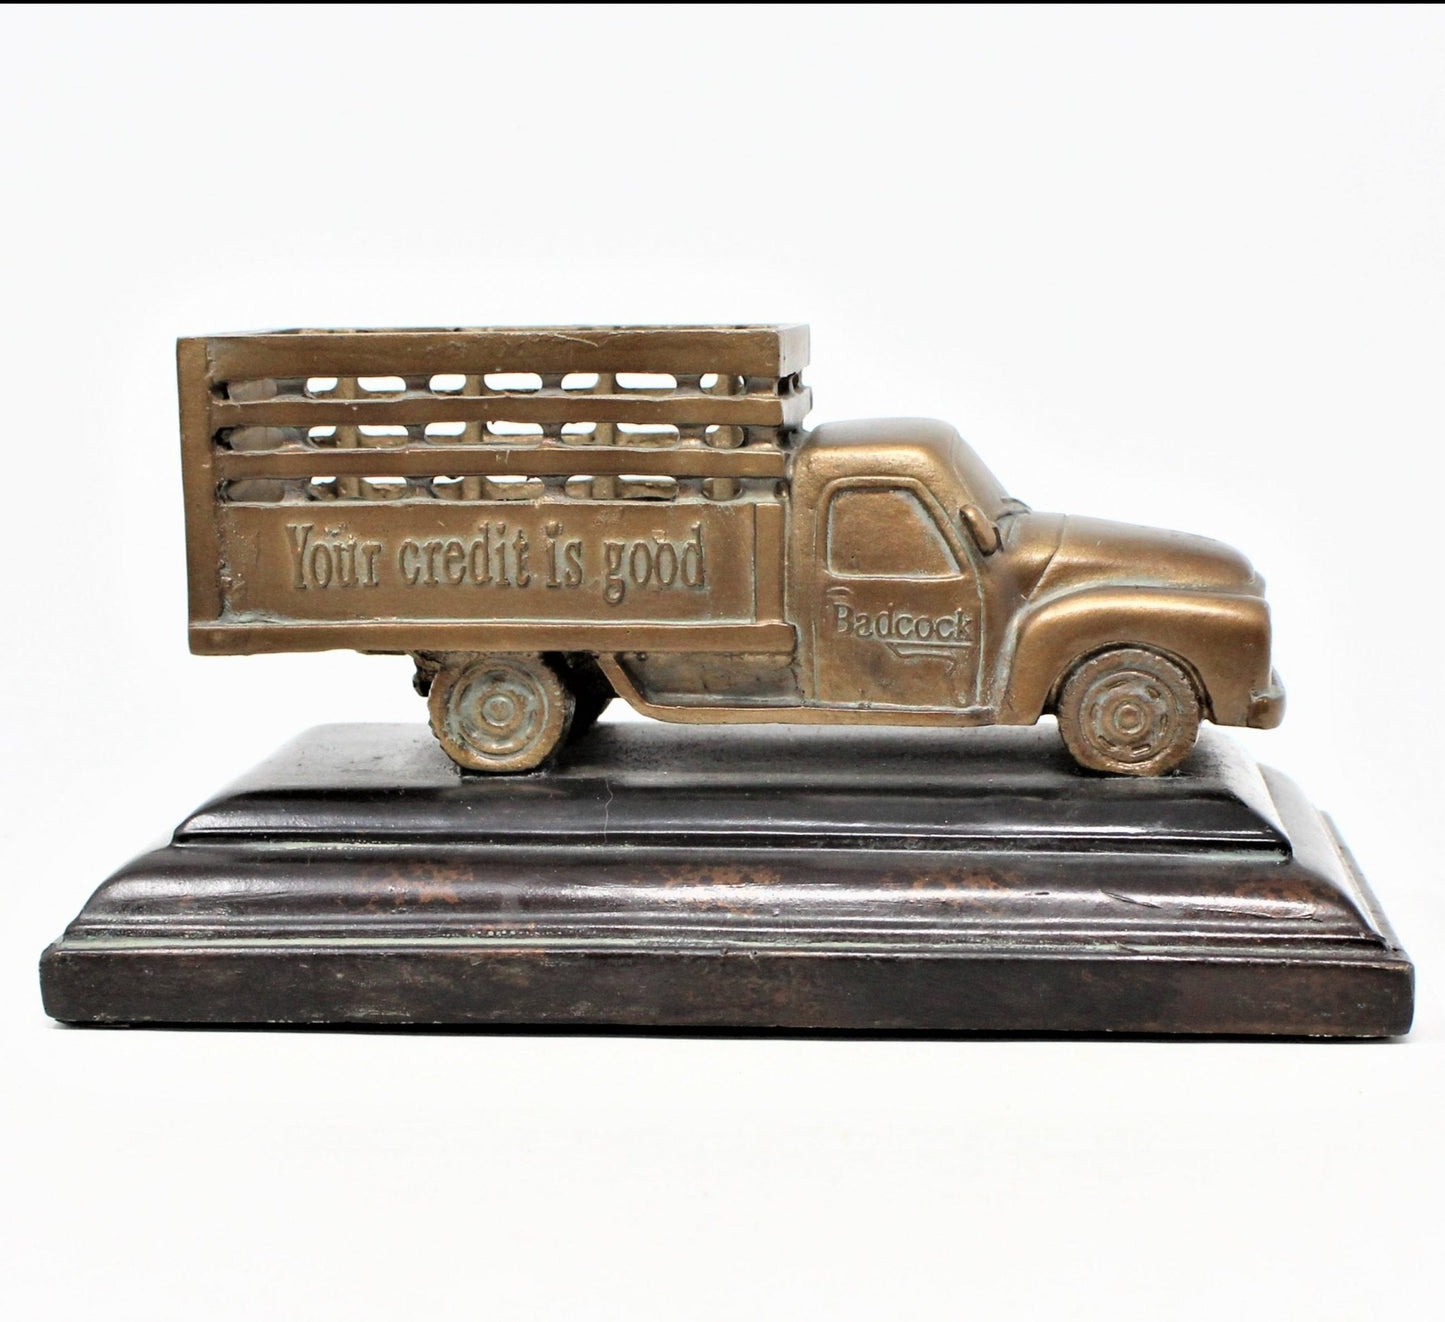 Figurine, Badcock Furniture Delivery Truck, 100th Anniversary Collectible